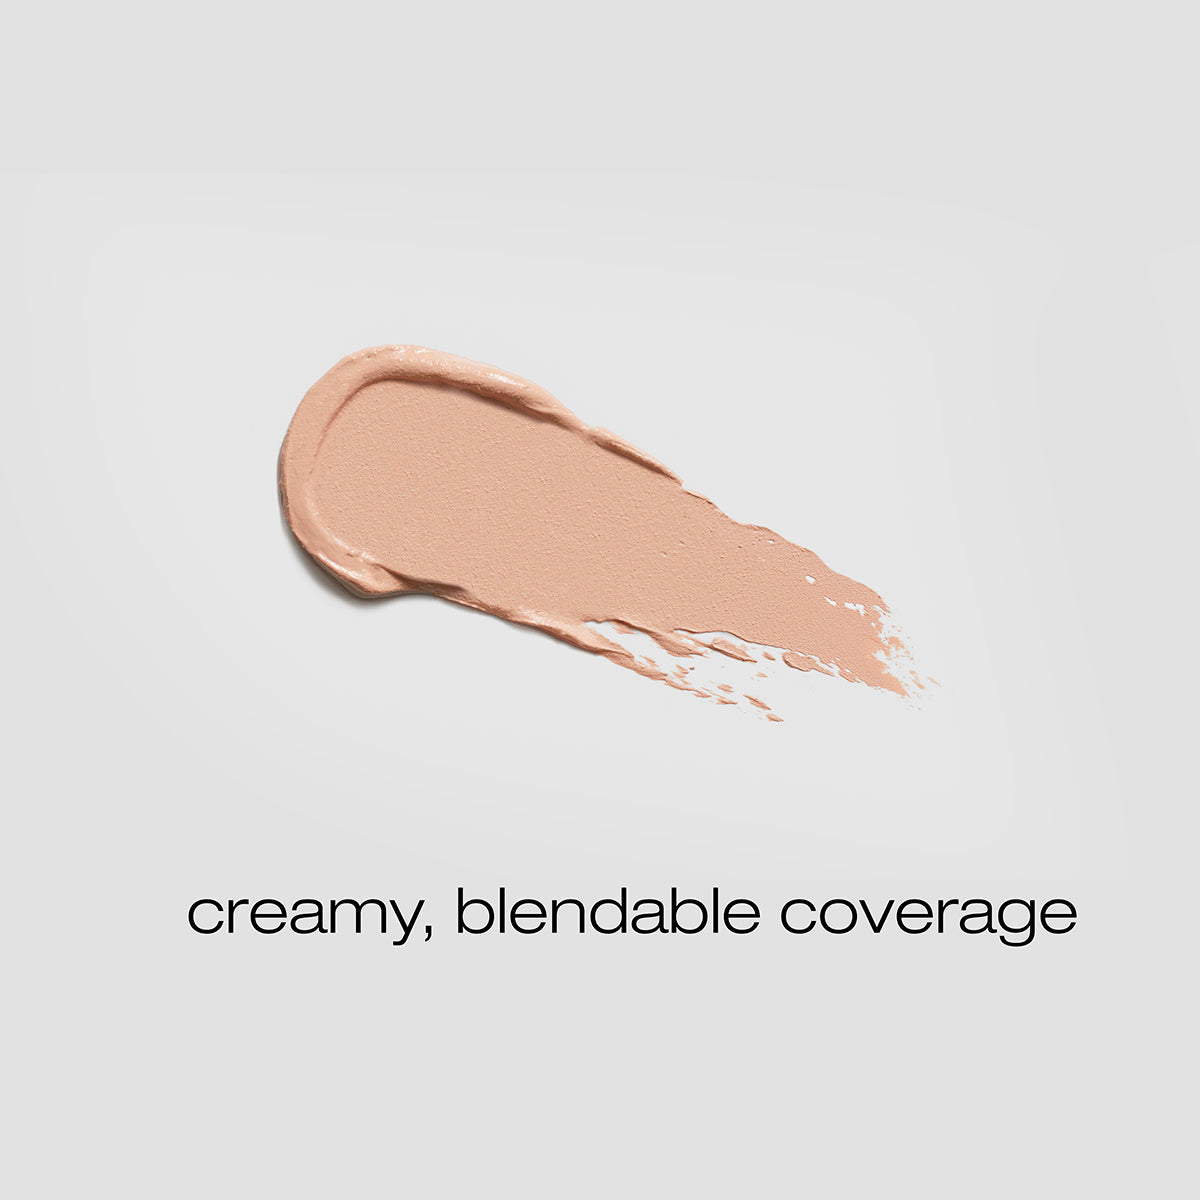 Spread of the custard concealer with description of creamy, blendable coverage